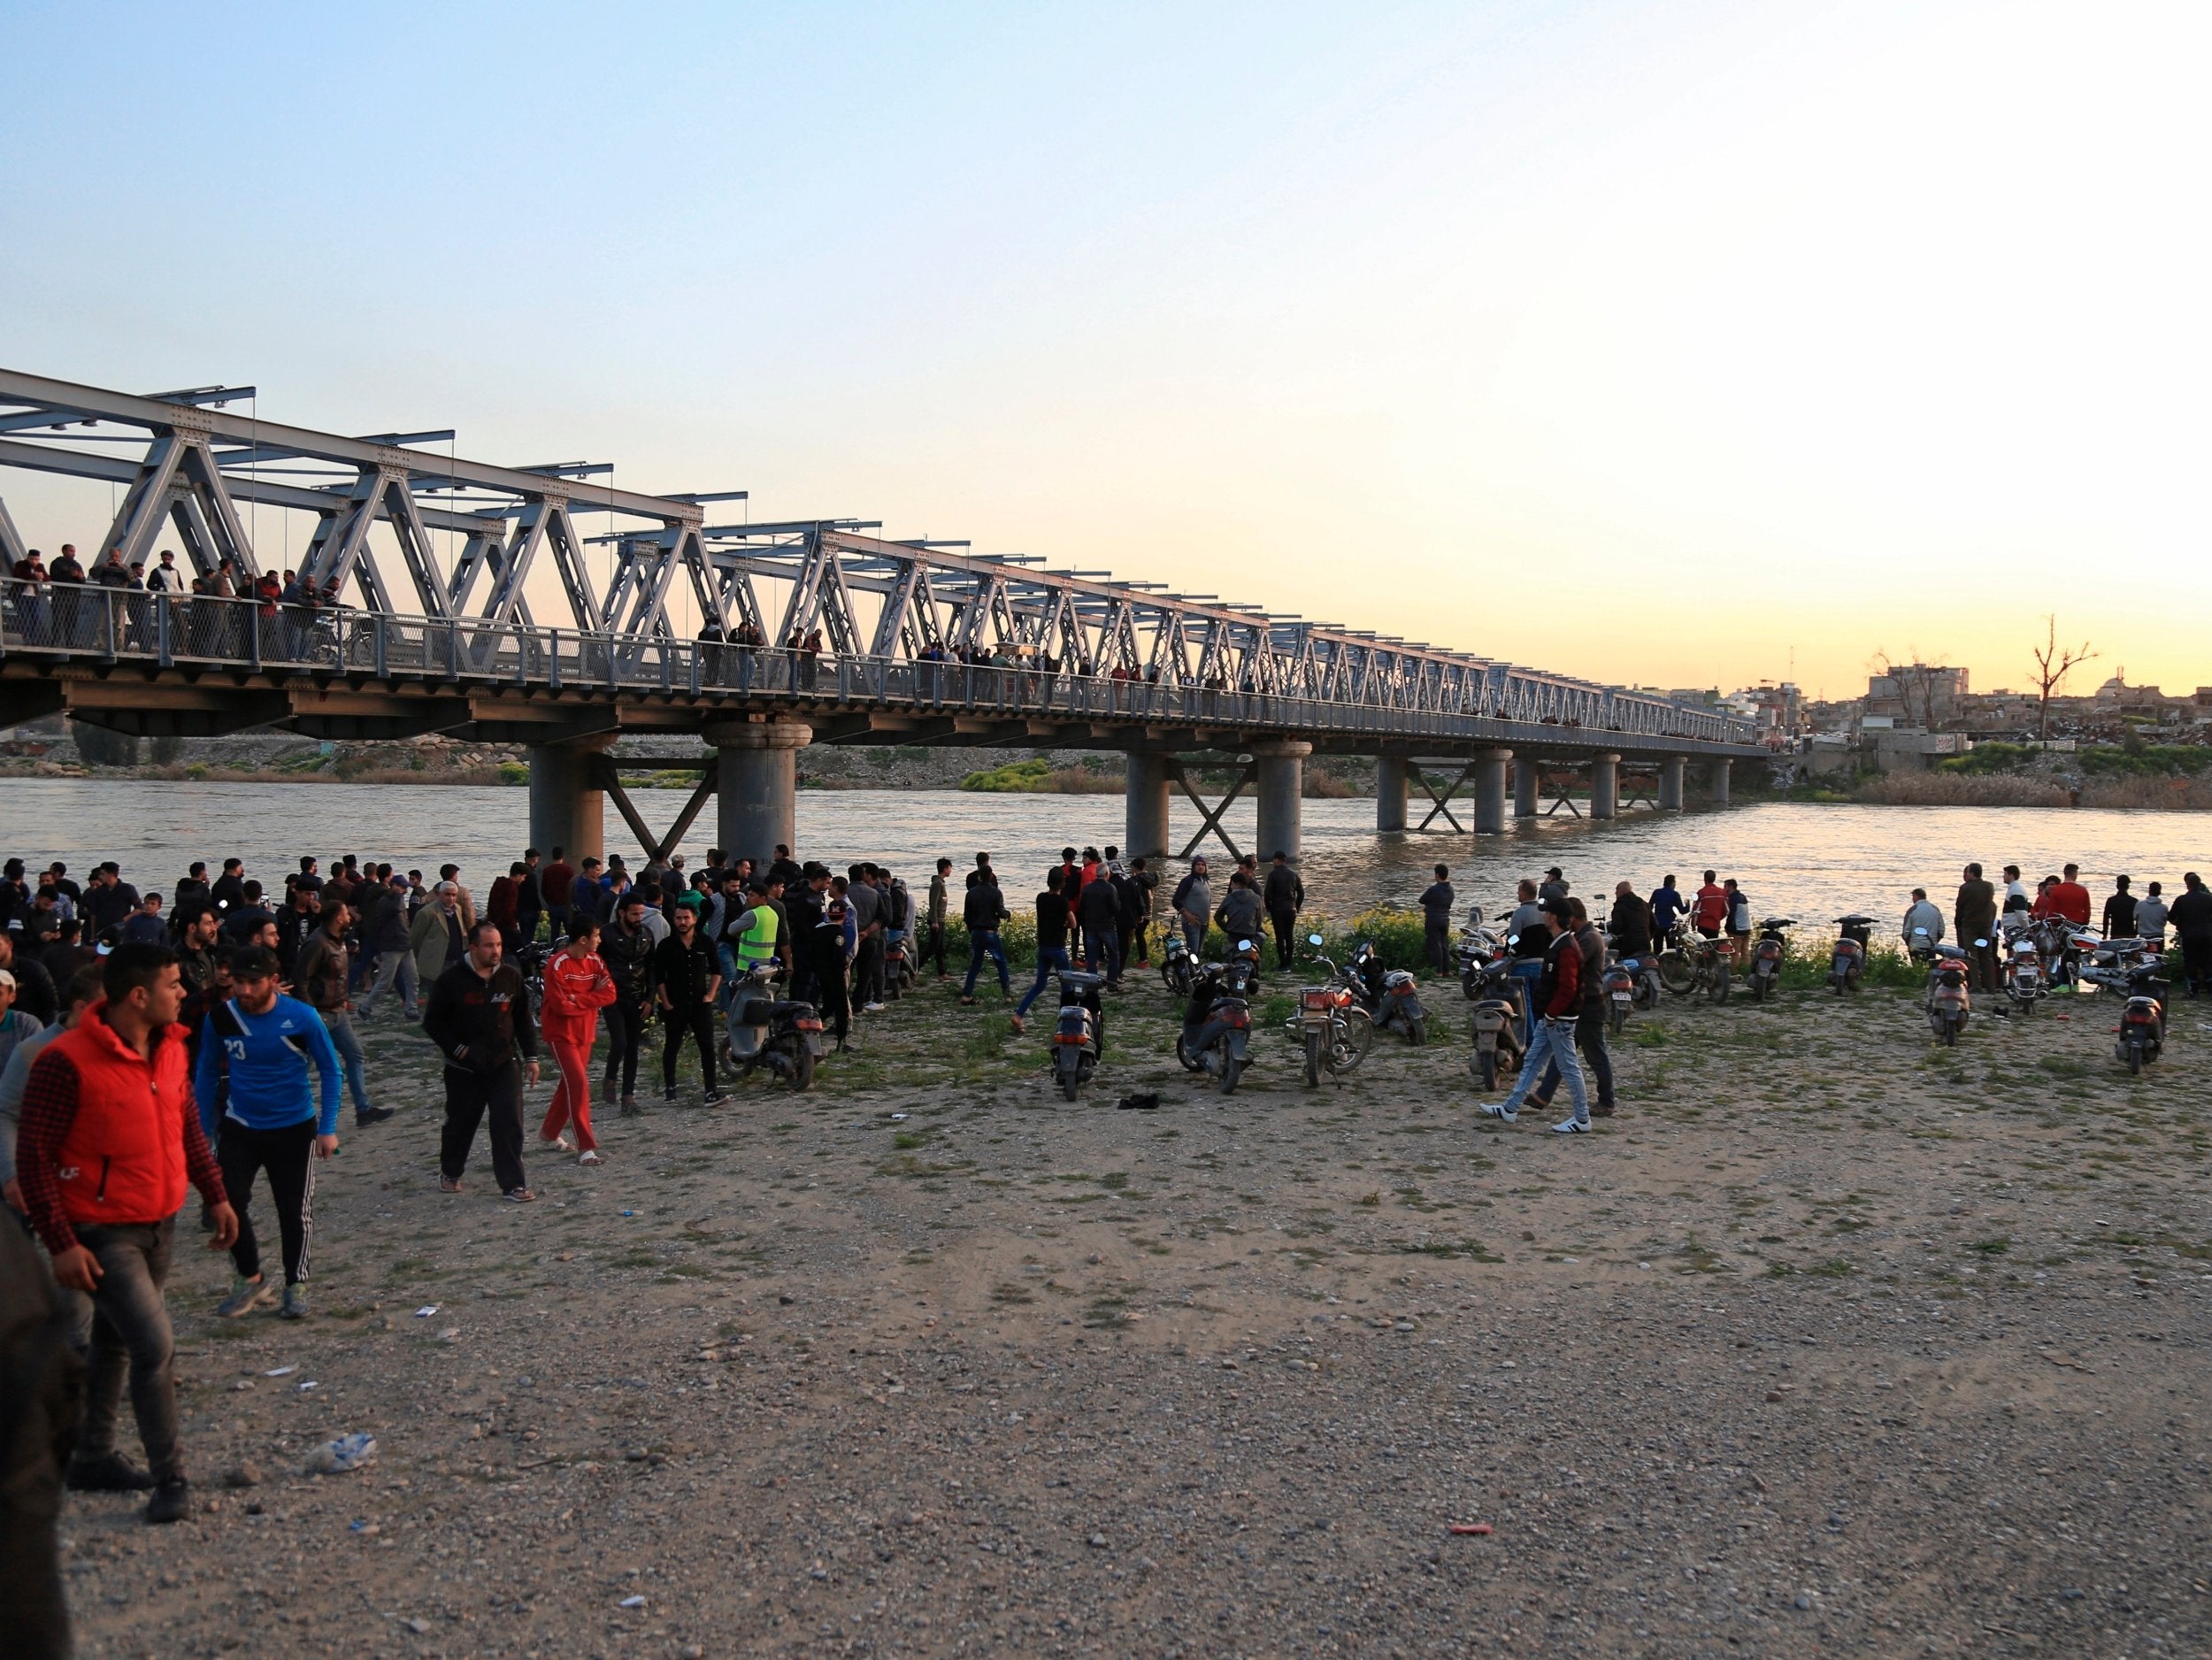 Relatives of victims wait on the bank of the Tigris where the boat sank yesterday